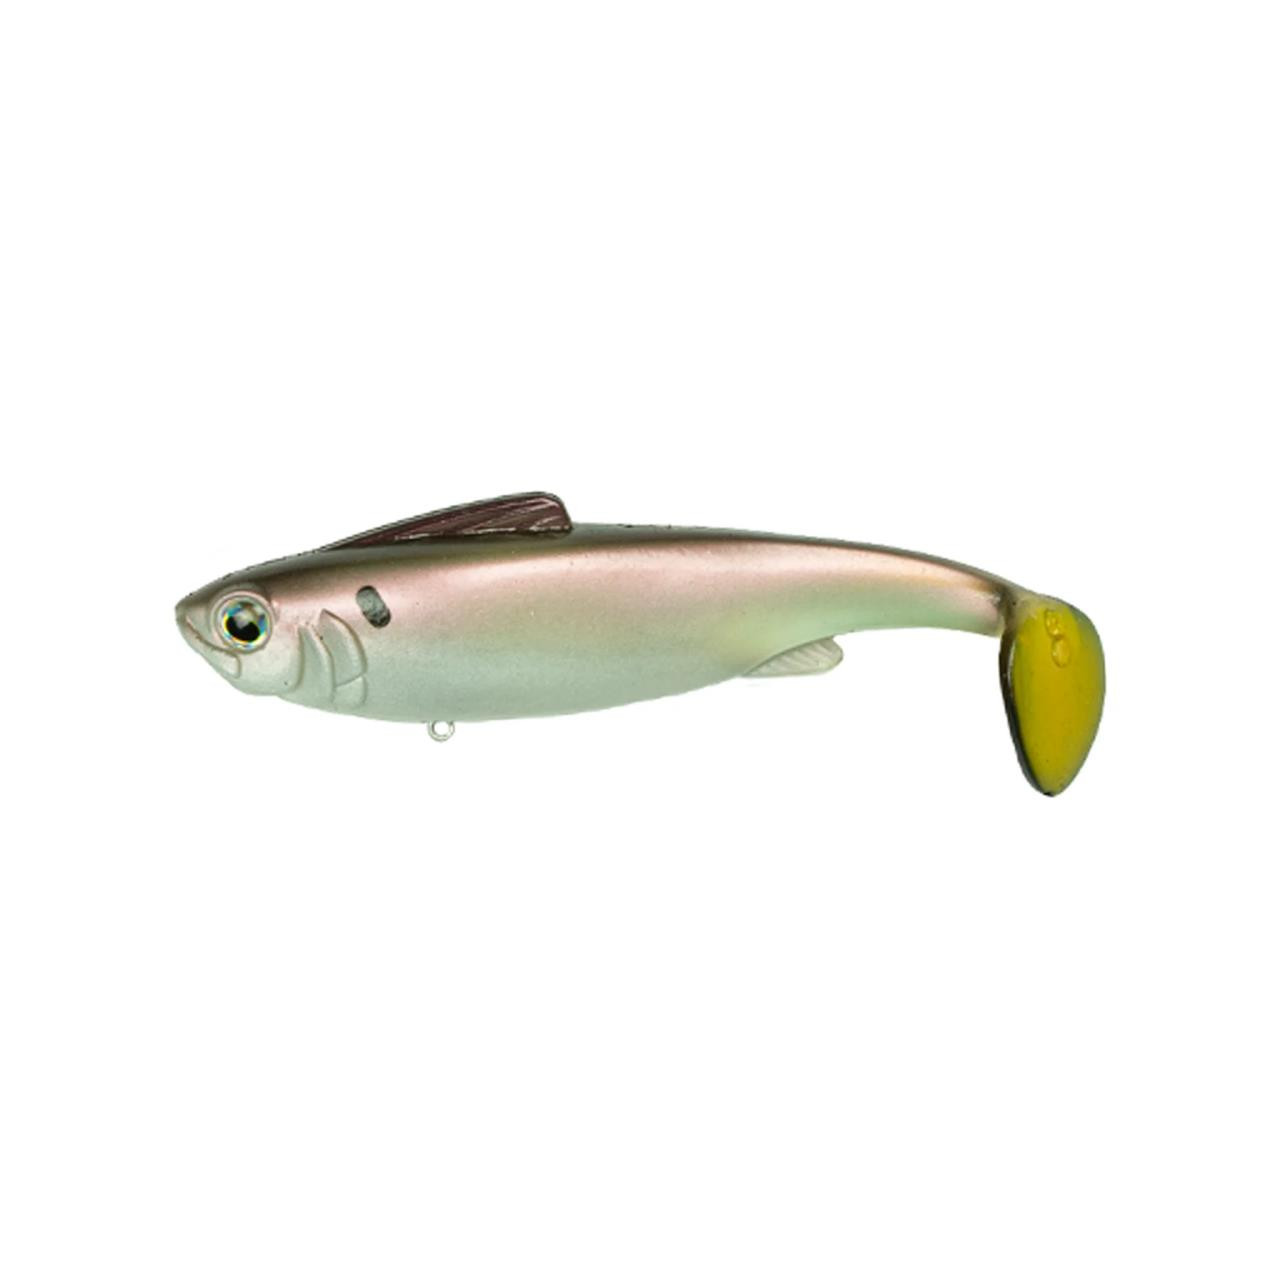 https://cdn11.bigcommerce.com/s-70mih4s/images/stencil/1280x1280/products/22938/63892/6th-Sense-Hangover-FFS-Series-Line-Through-Swimbait-FAMILY6673_image2__82094.1703761432.jpg?c=2